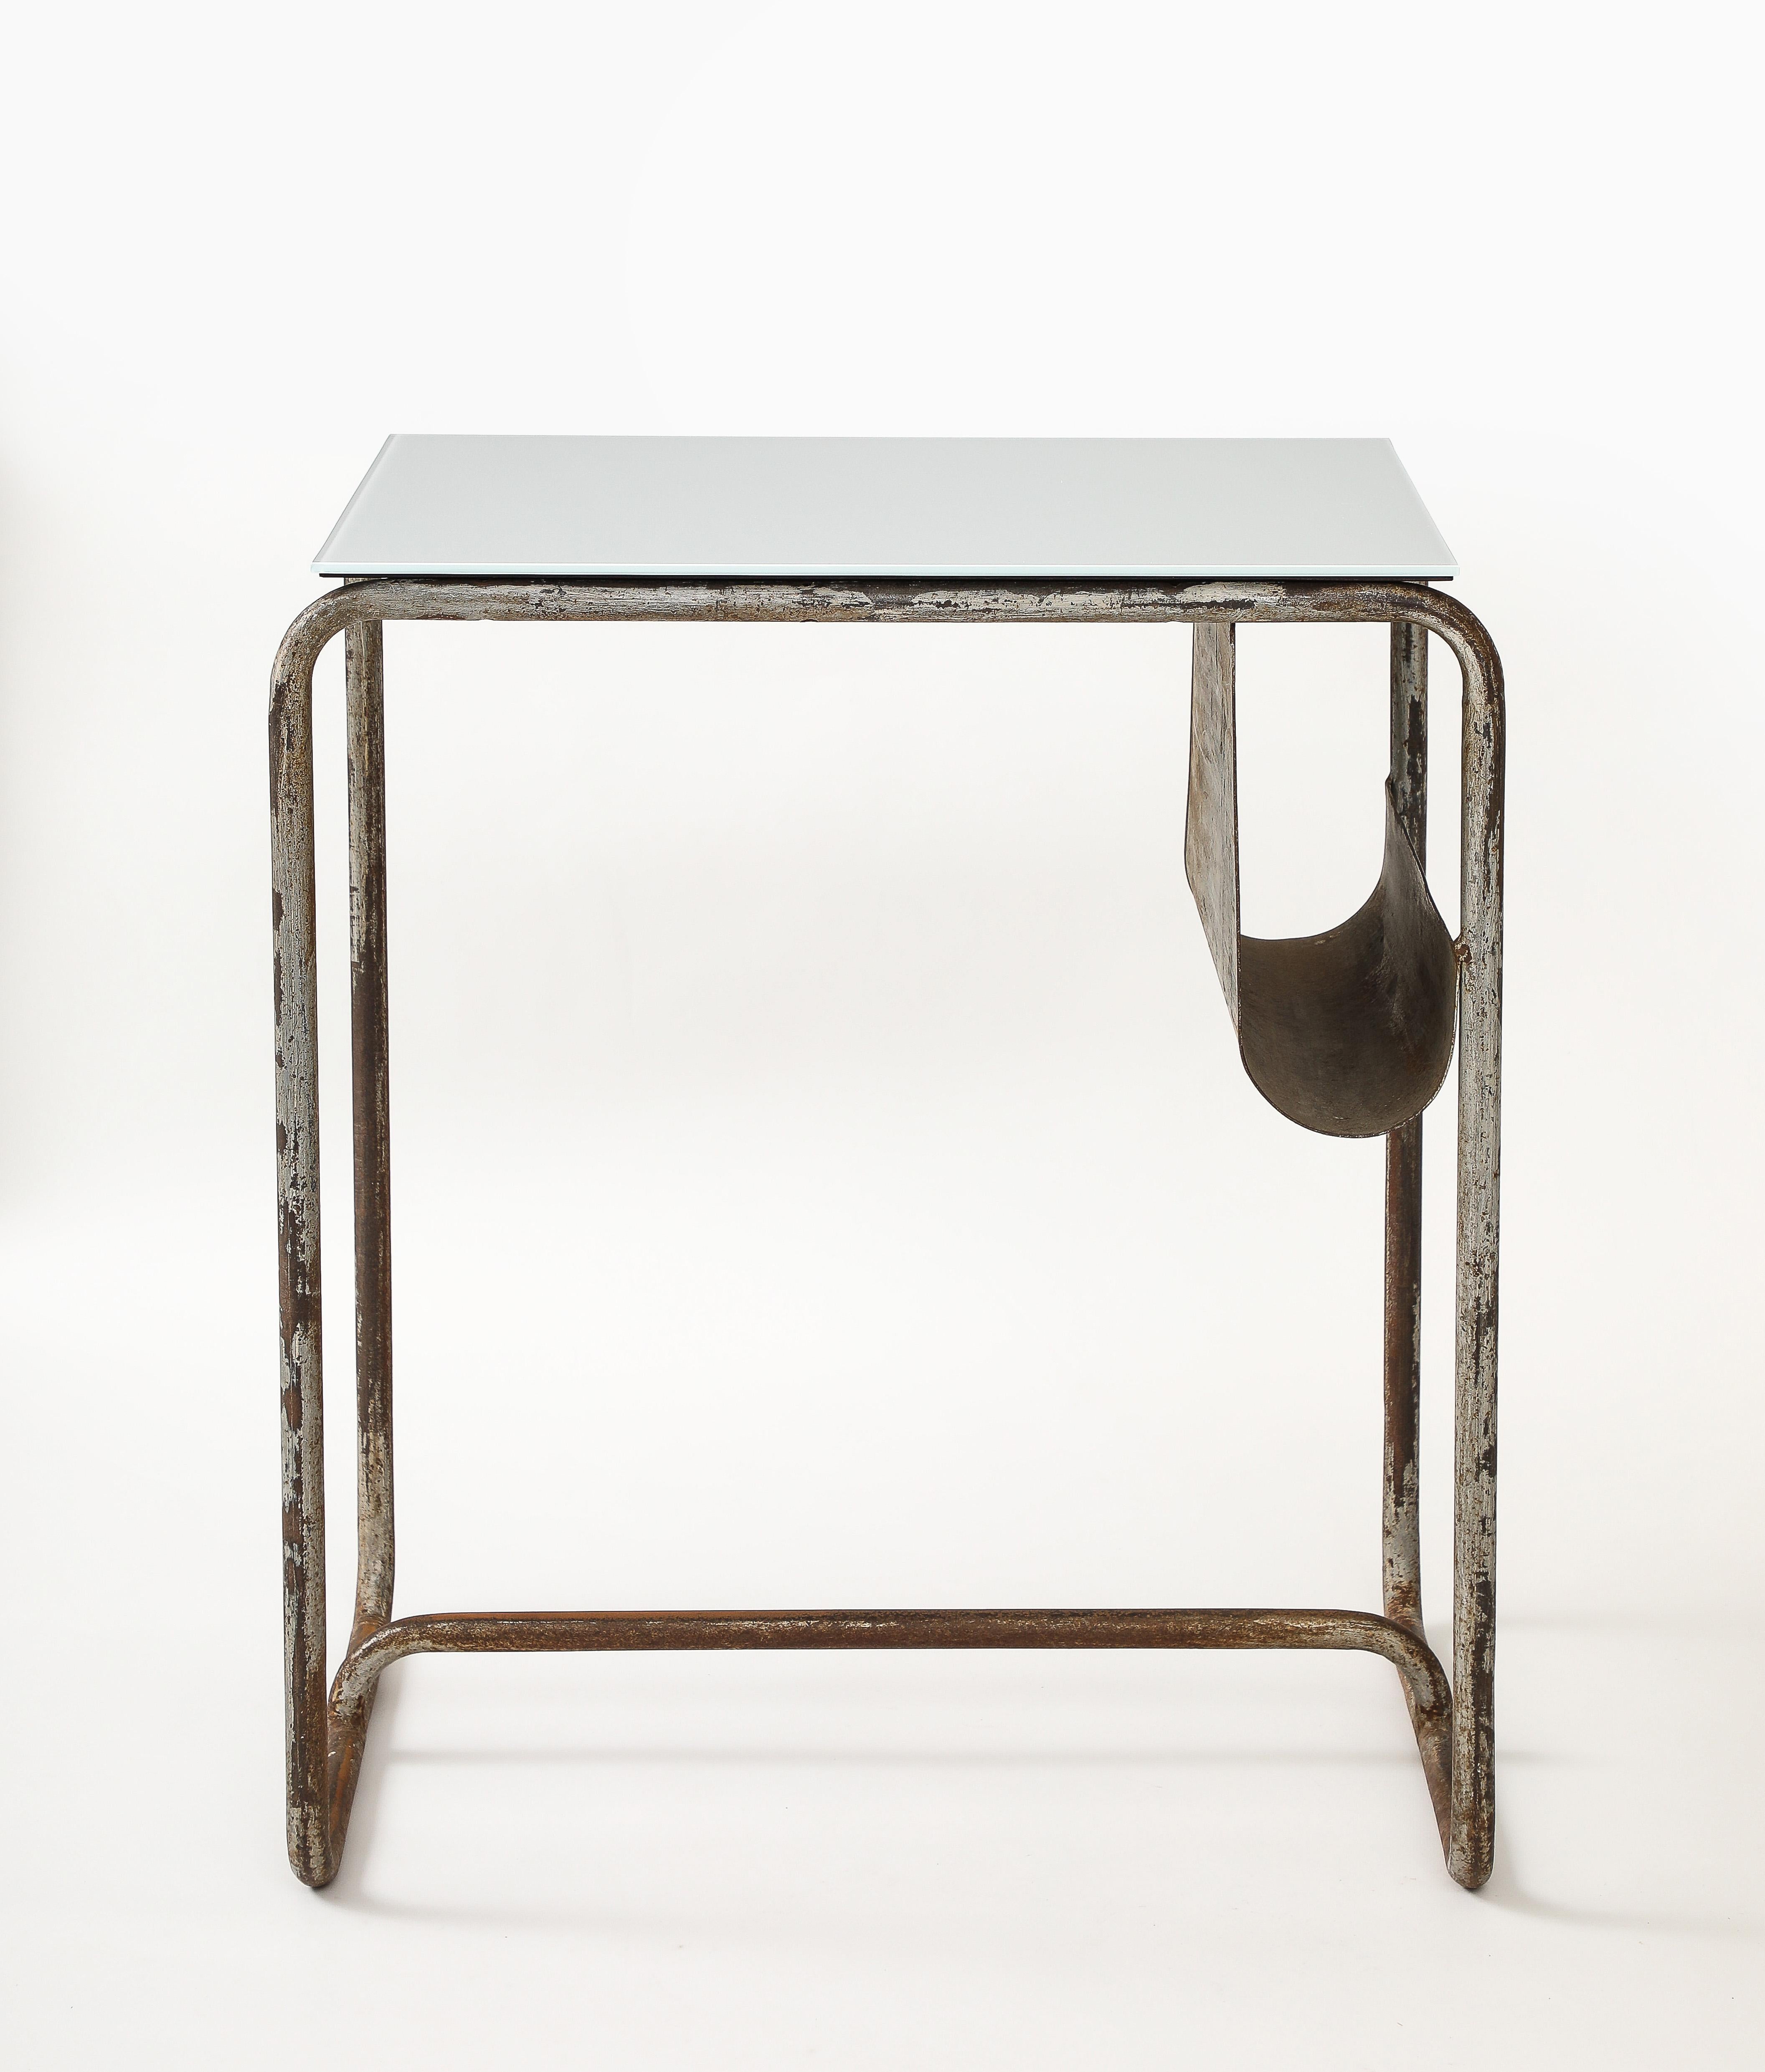 Early Modernist Desk Side Table, Nickel Patina, Opaline Top, France, c. 1920

Excellent example of early tubular furniture.  New Opaline Non Tempered Glass Top.  Side Magazine  Paper Storage